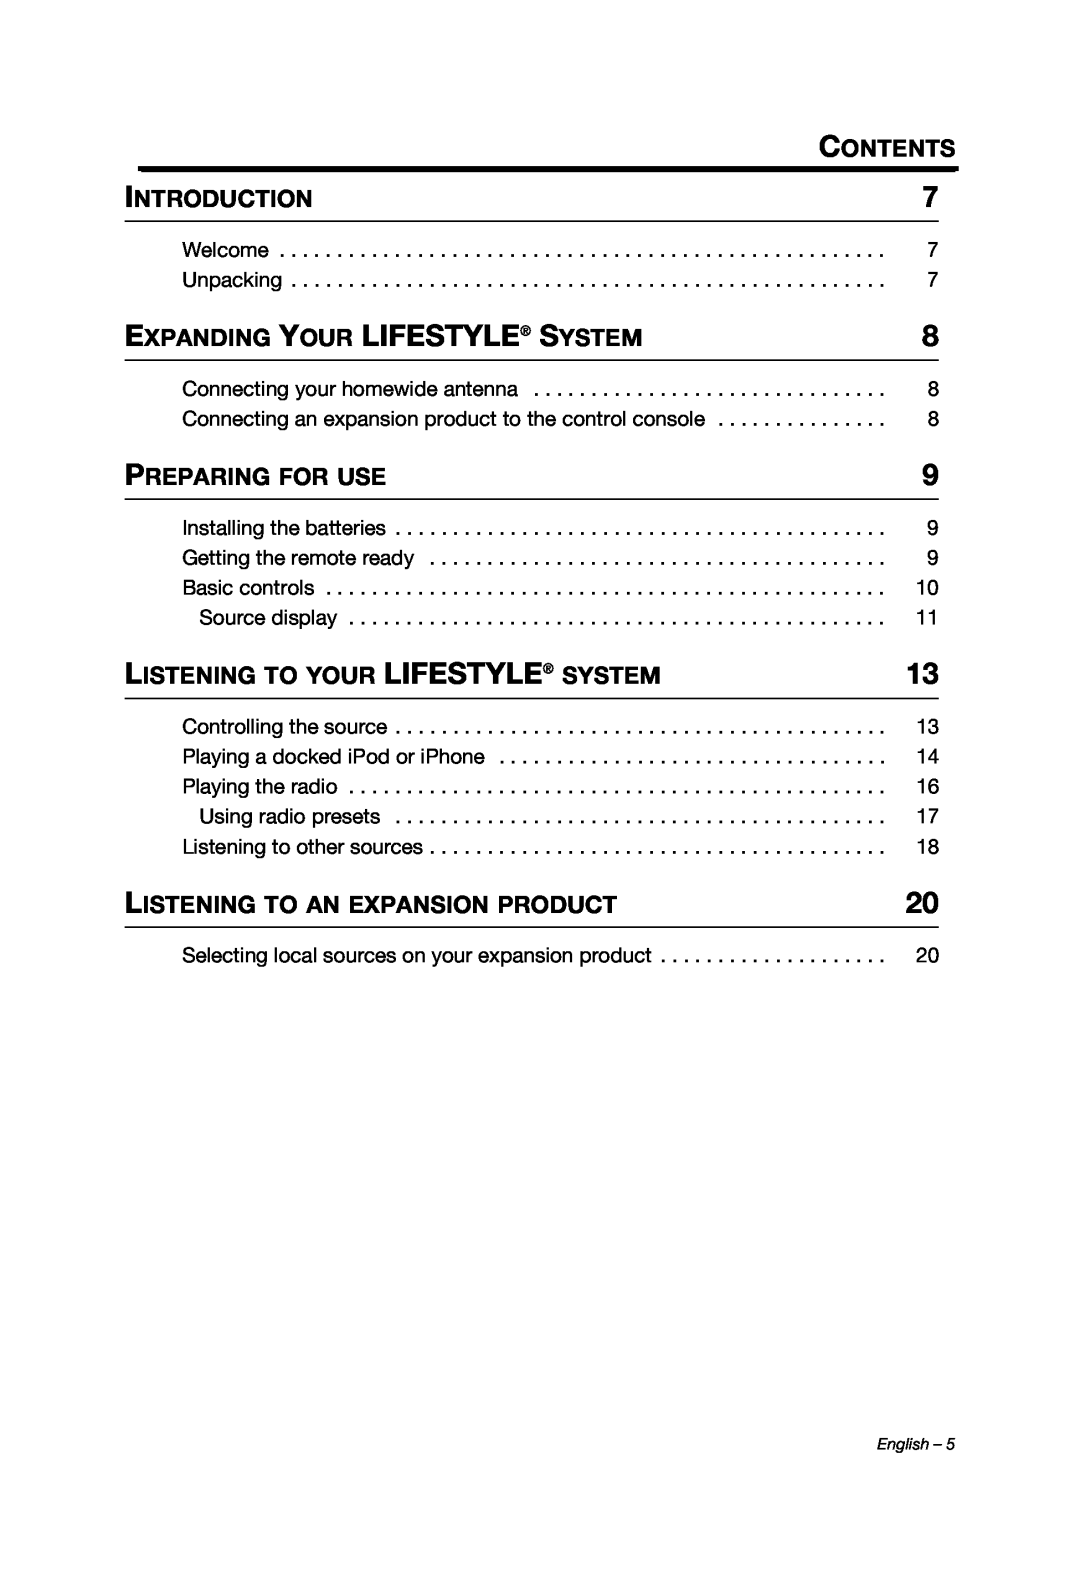 Bose Personal Music Center III, PMCIII manual Contents, Introduction, Expanding Your Lifestyle System, Preparing For Use 